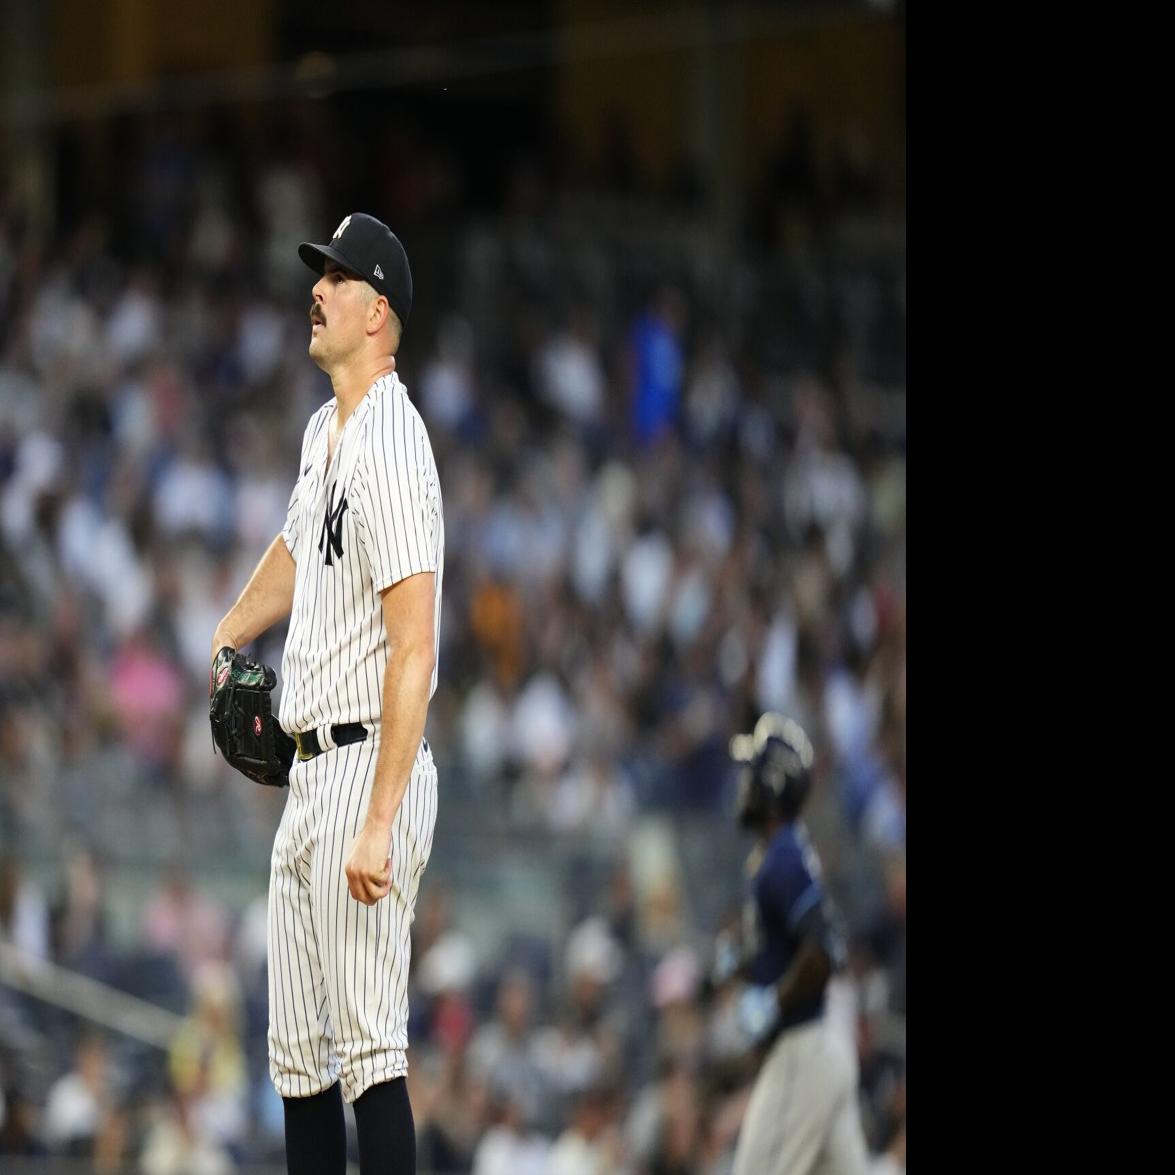 Behind the Yankees' most miserable season in 30 years - The Athletic